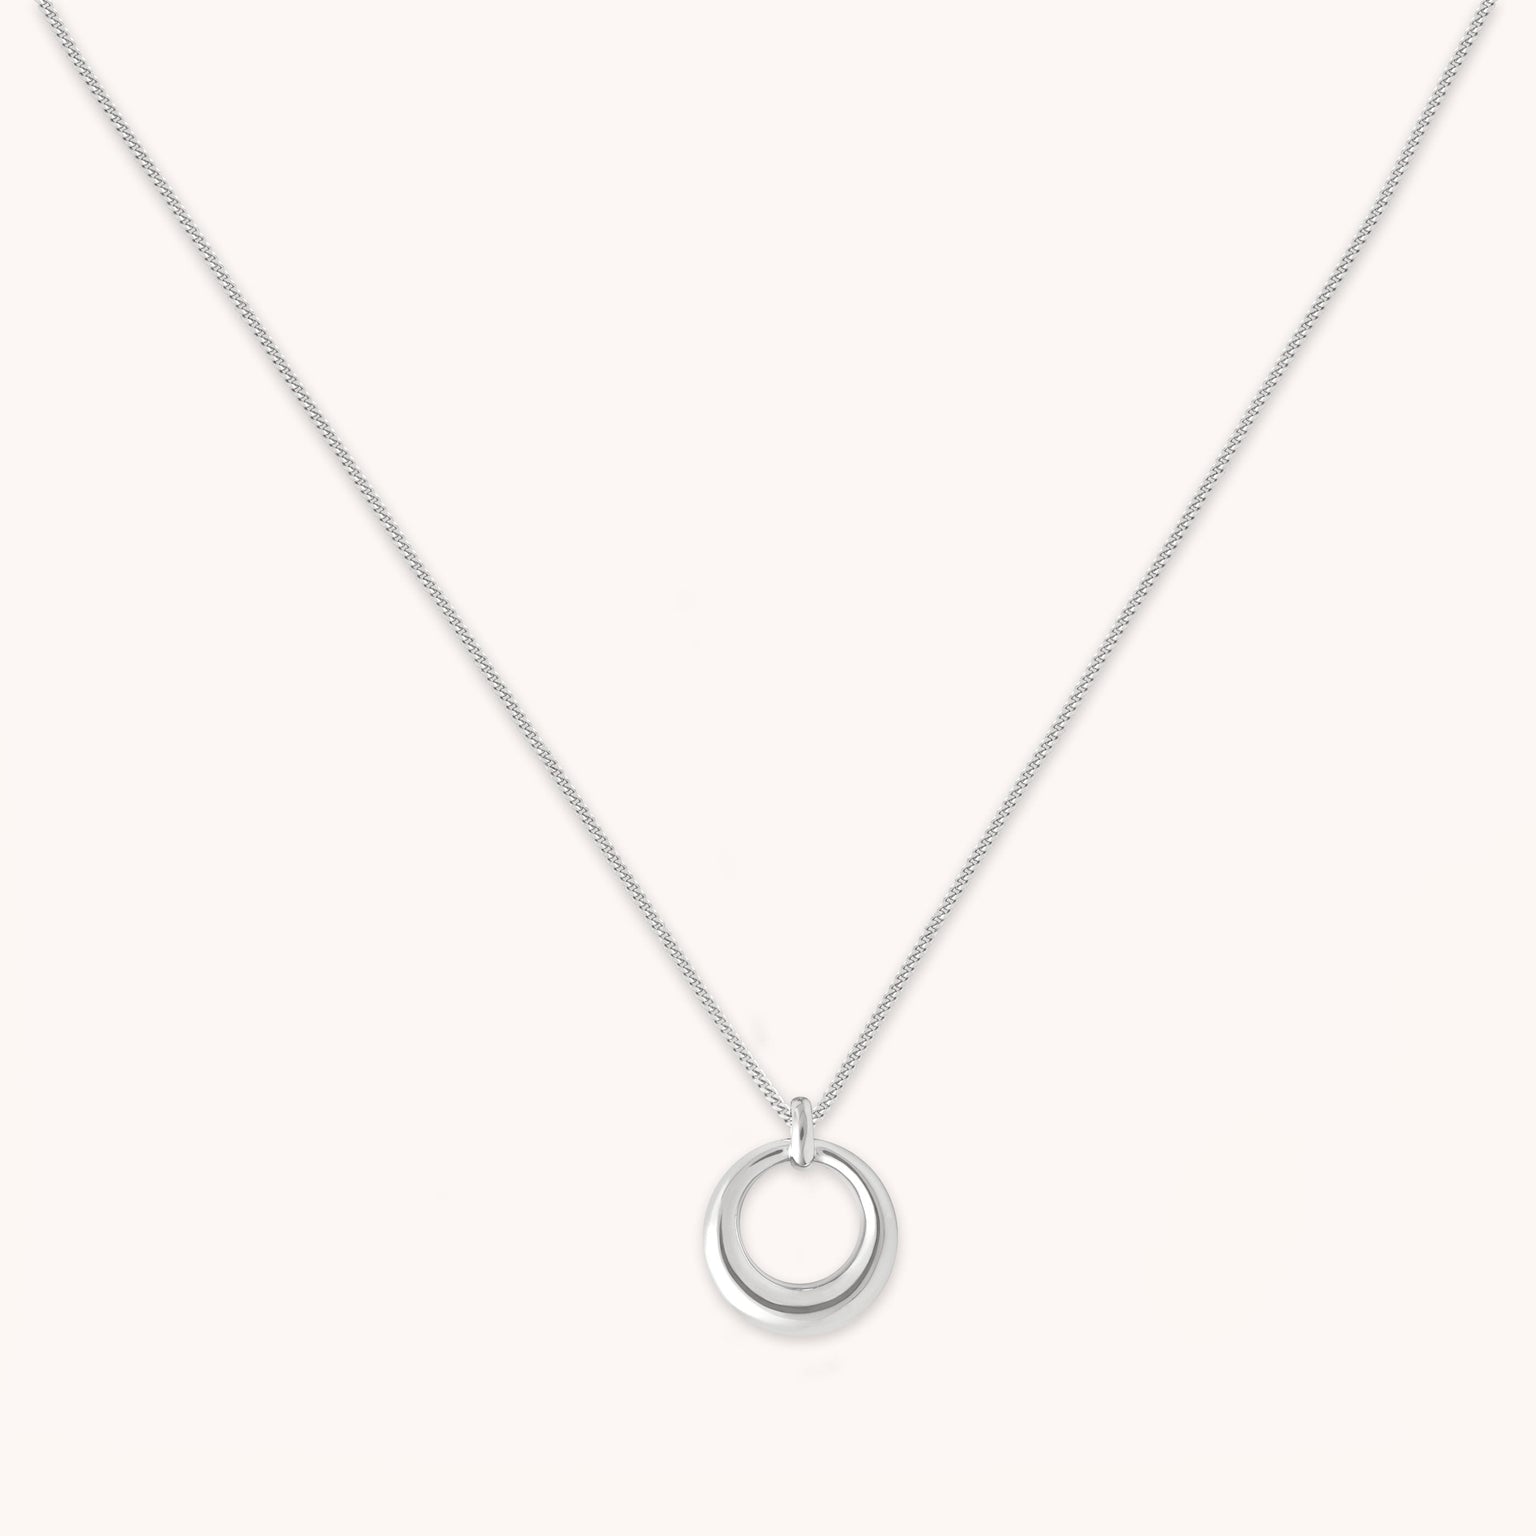 Bold Halo Pendant Necklace in Silver